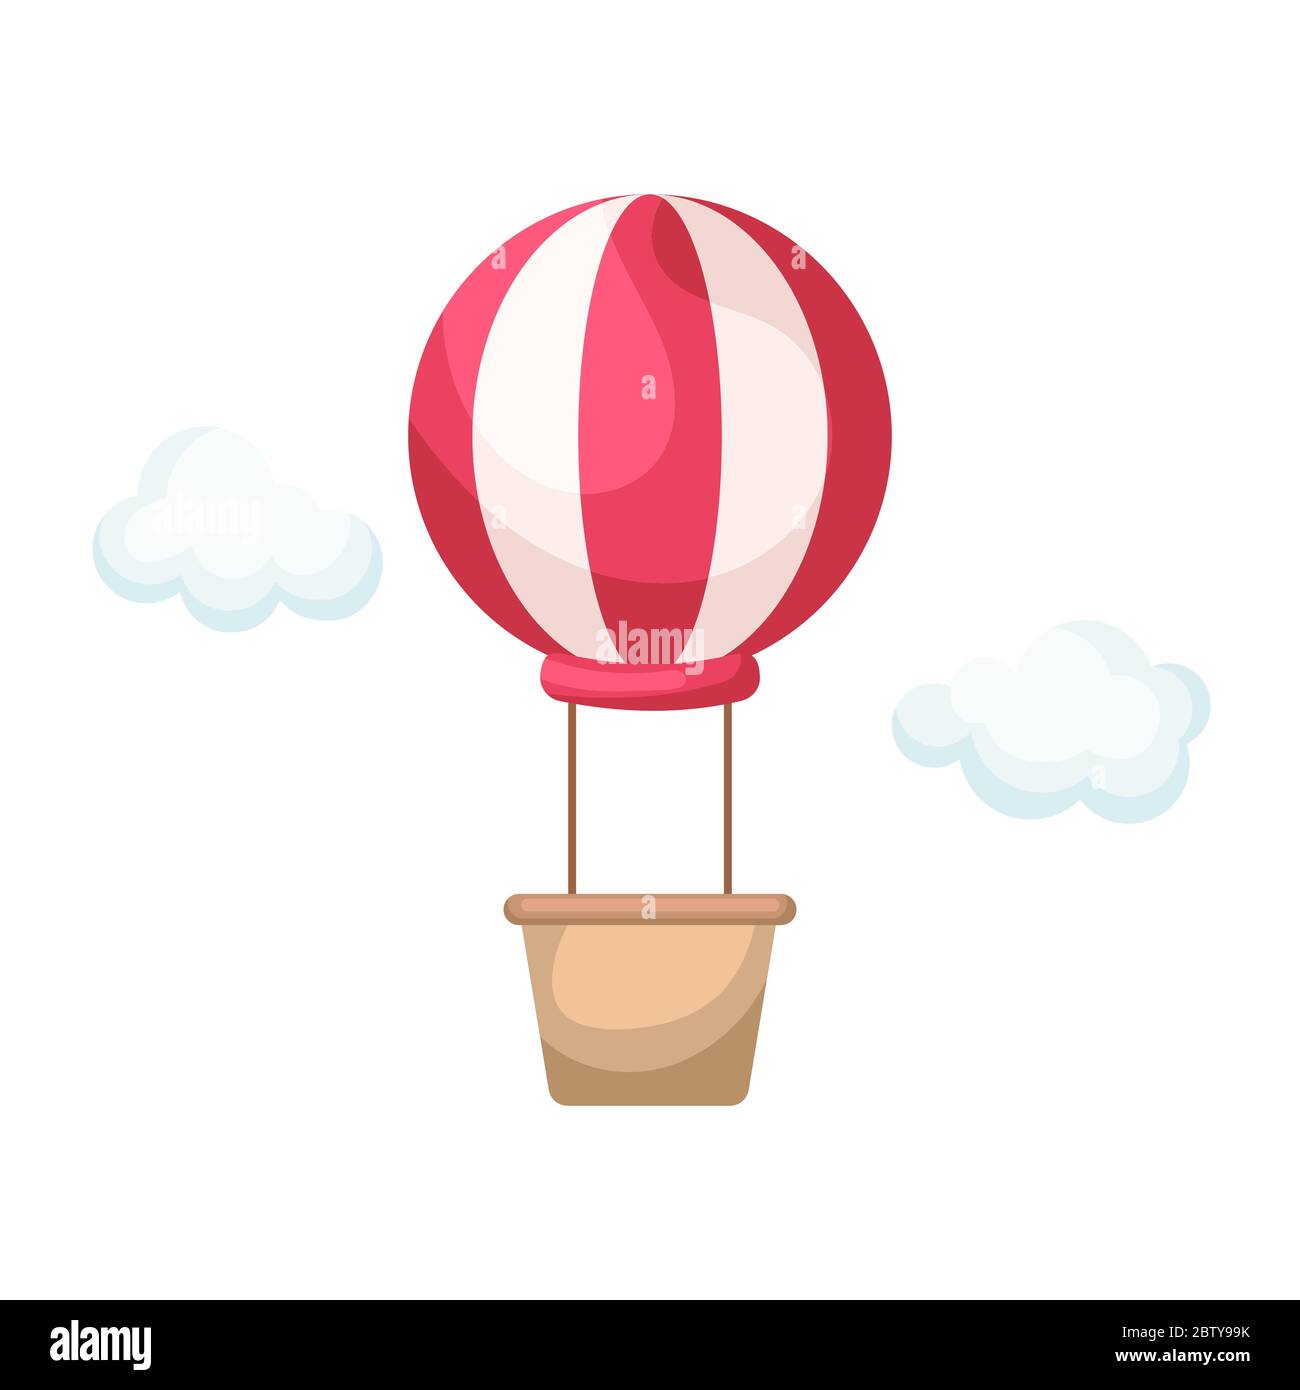 Red striped hot air-balloon with brown basket with white clouds for design of album, scrapbook, card and invitation. Flat cartoon vector illustration Stock Vector